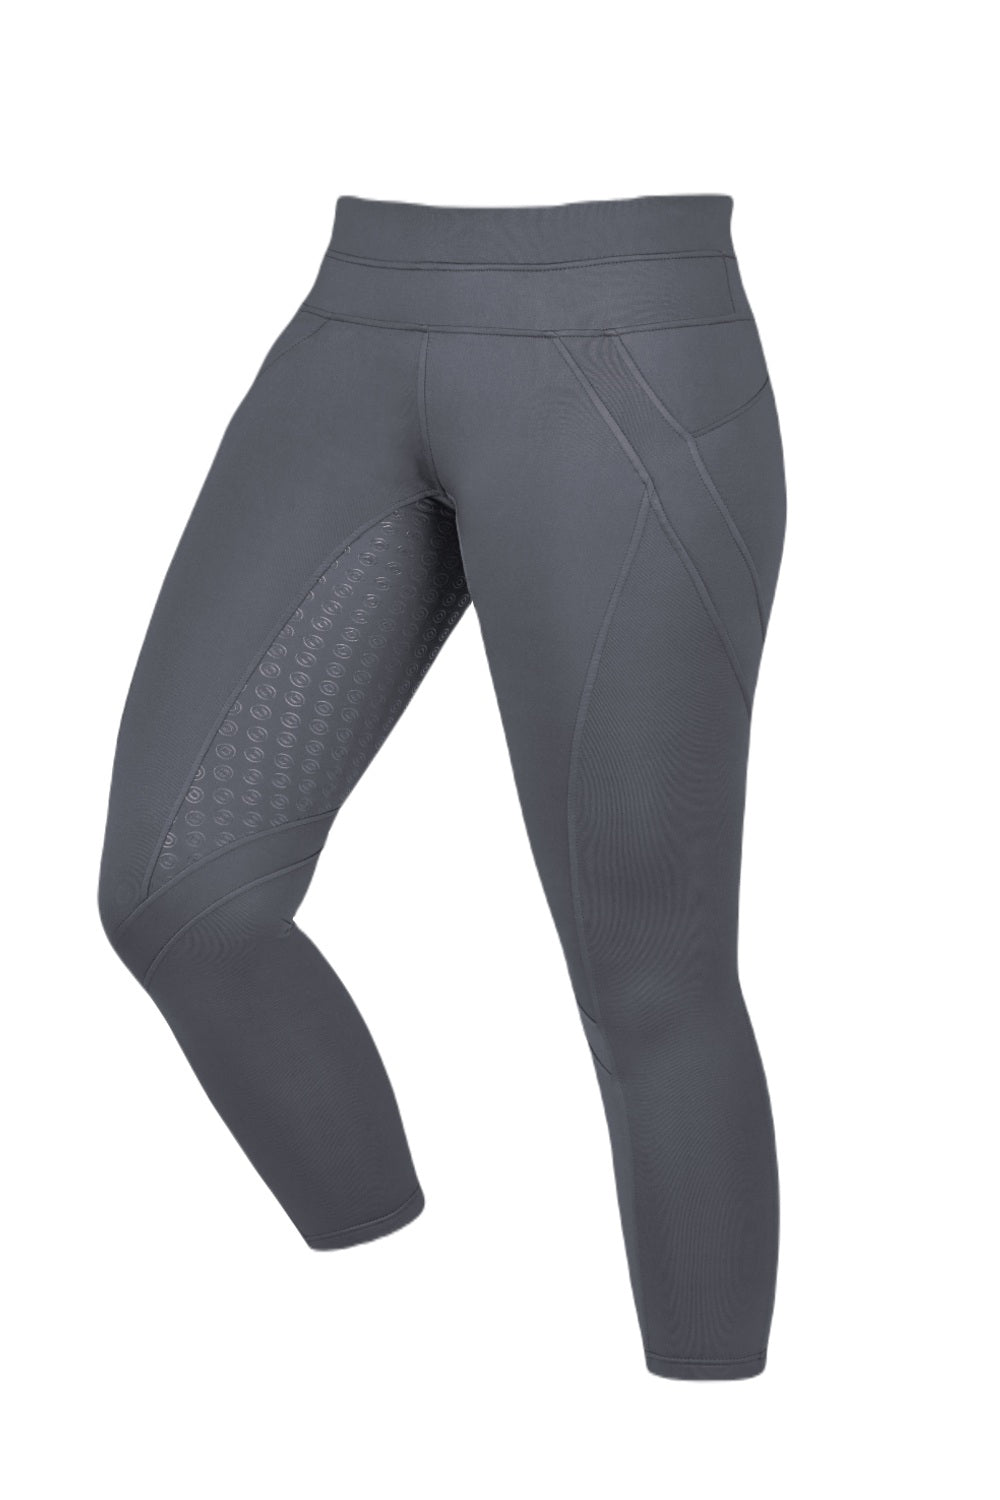 Dublin Performance Thermal Active Tights in Charcoal 